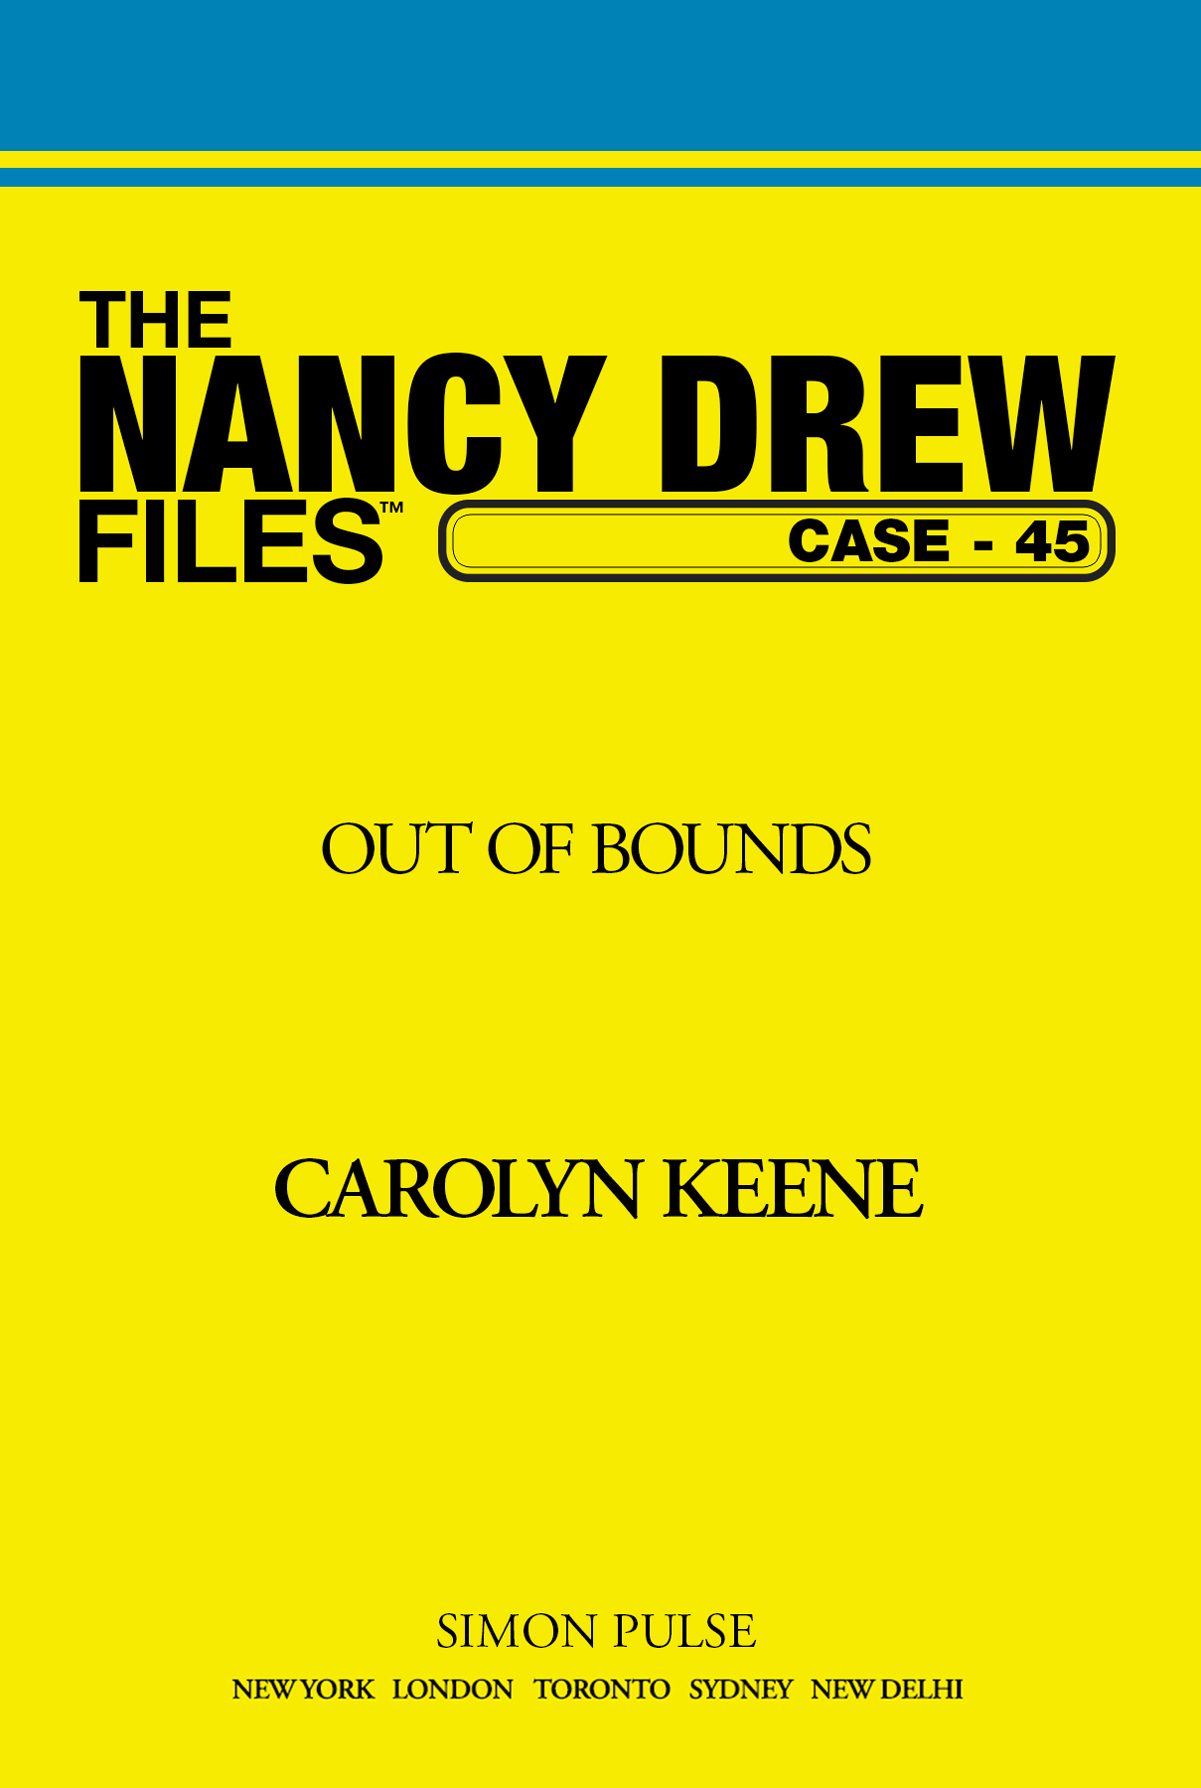 Out of Bounds by Carolyn Keene